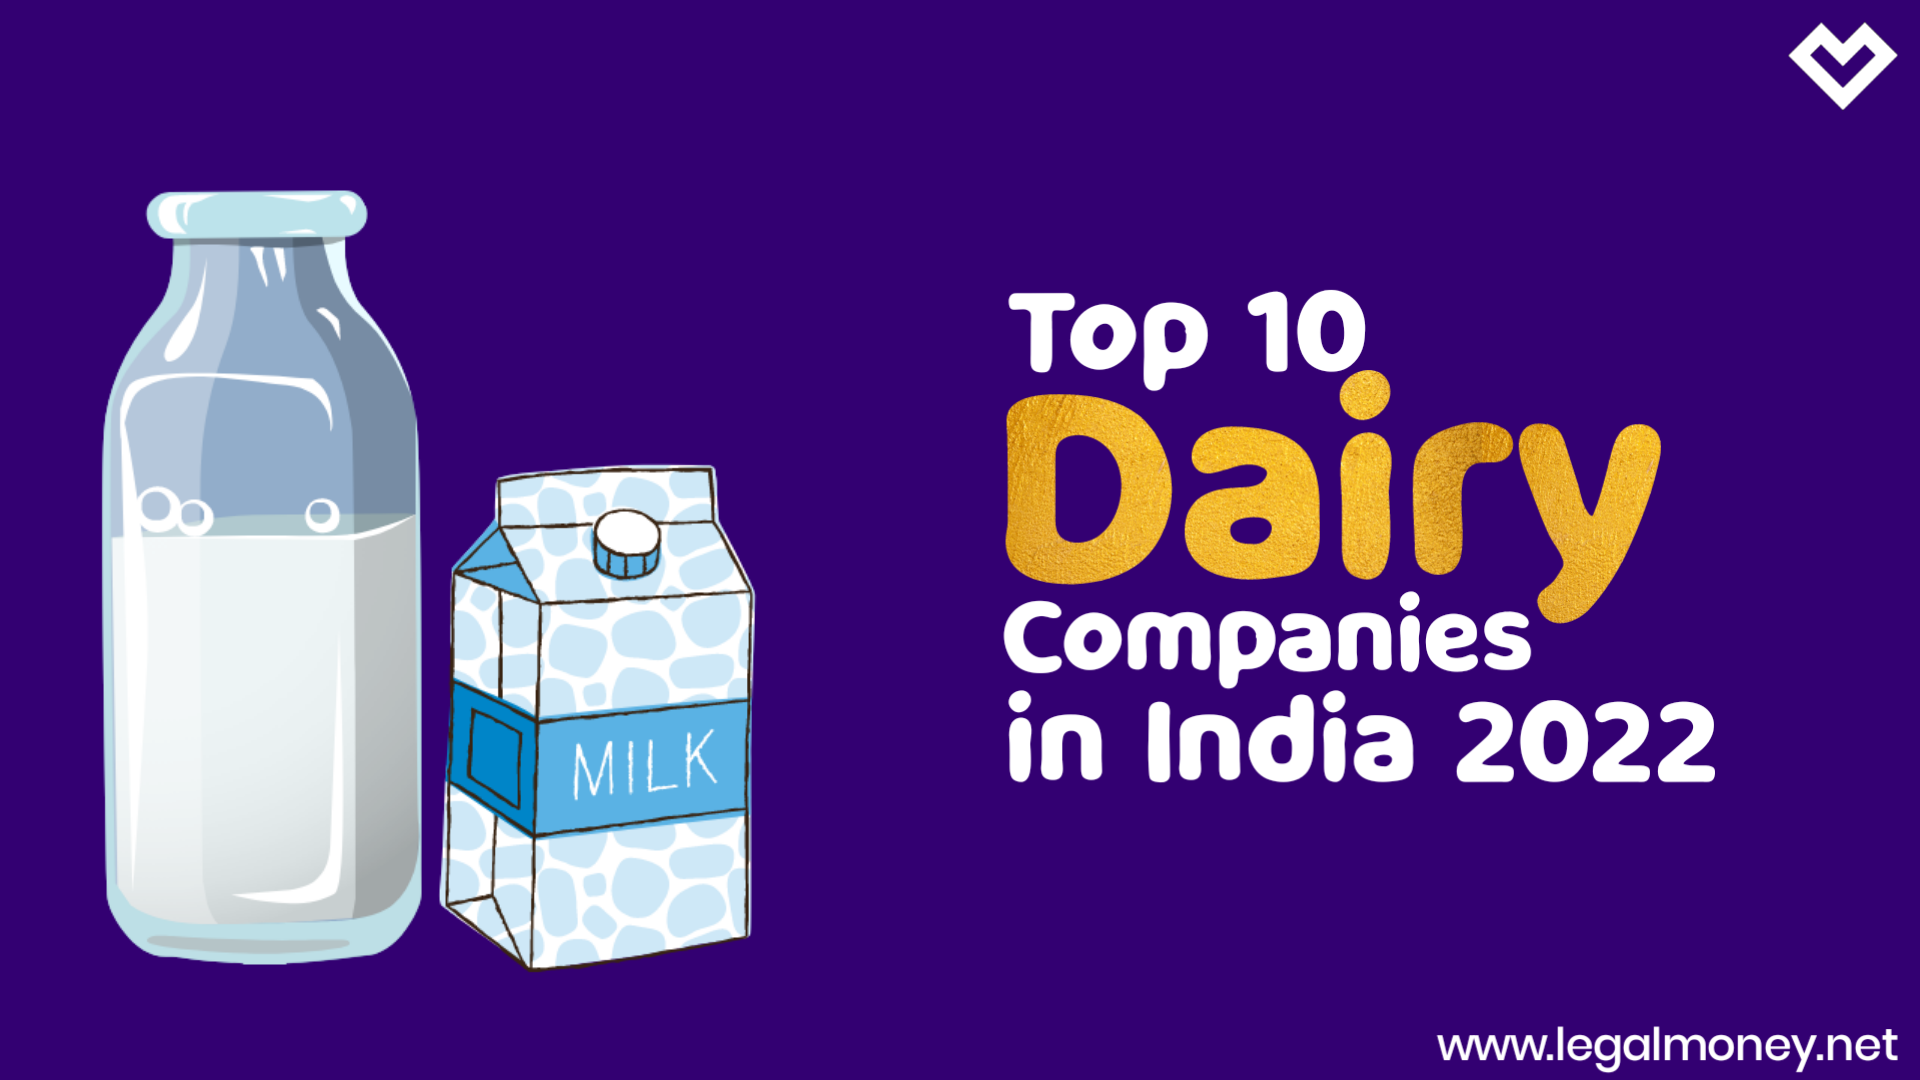 Top 10 Dairy Companies in India 2022